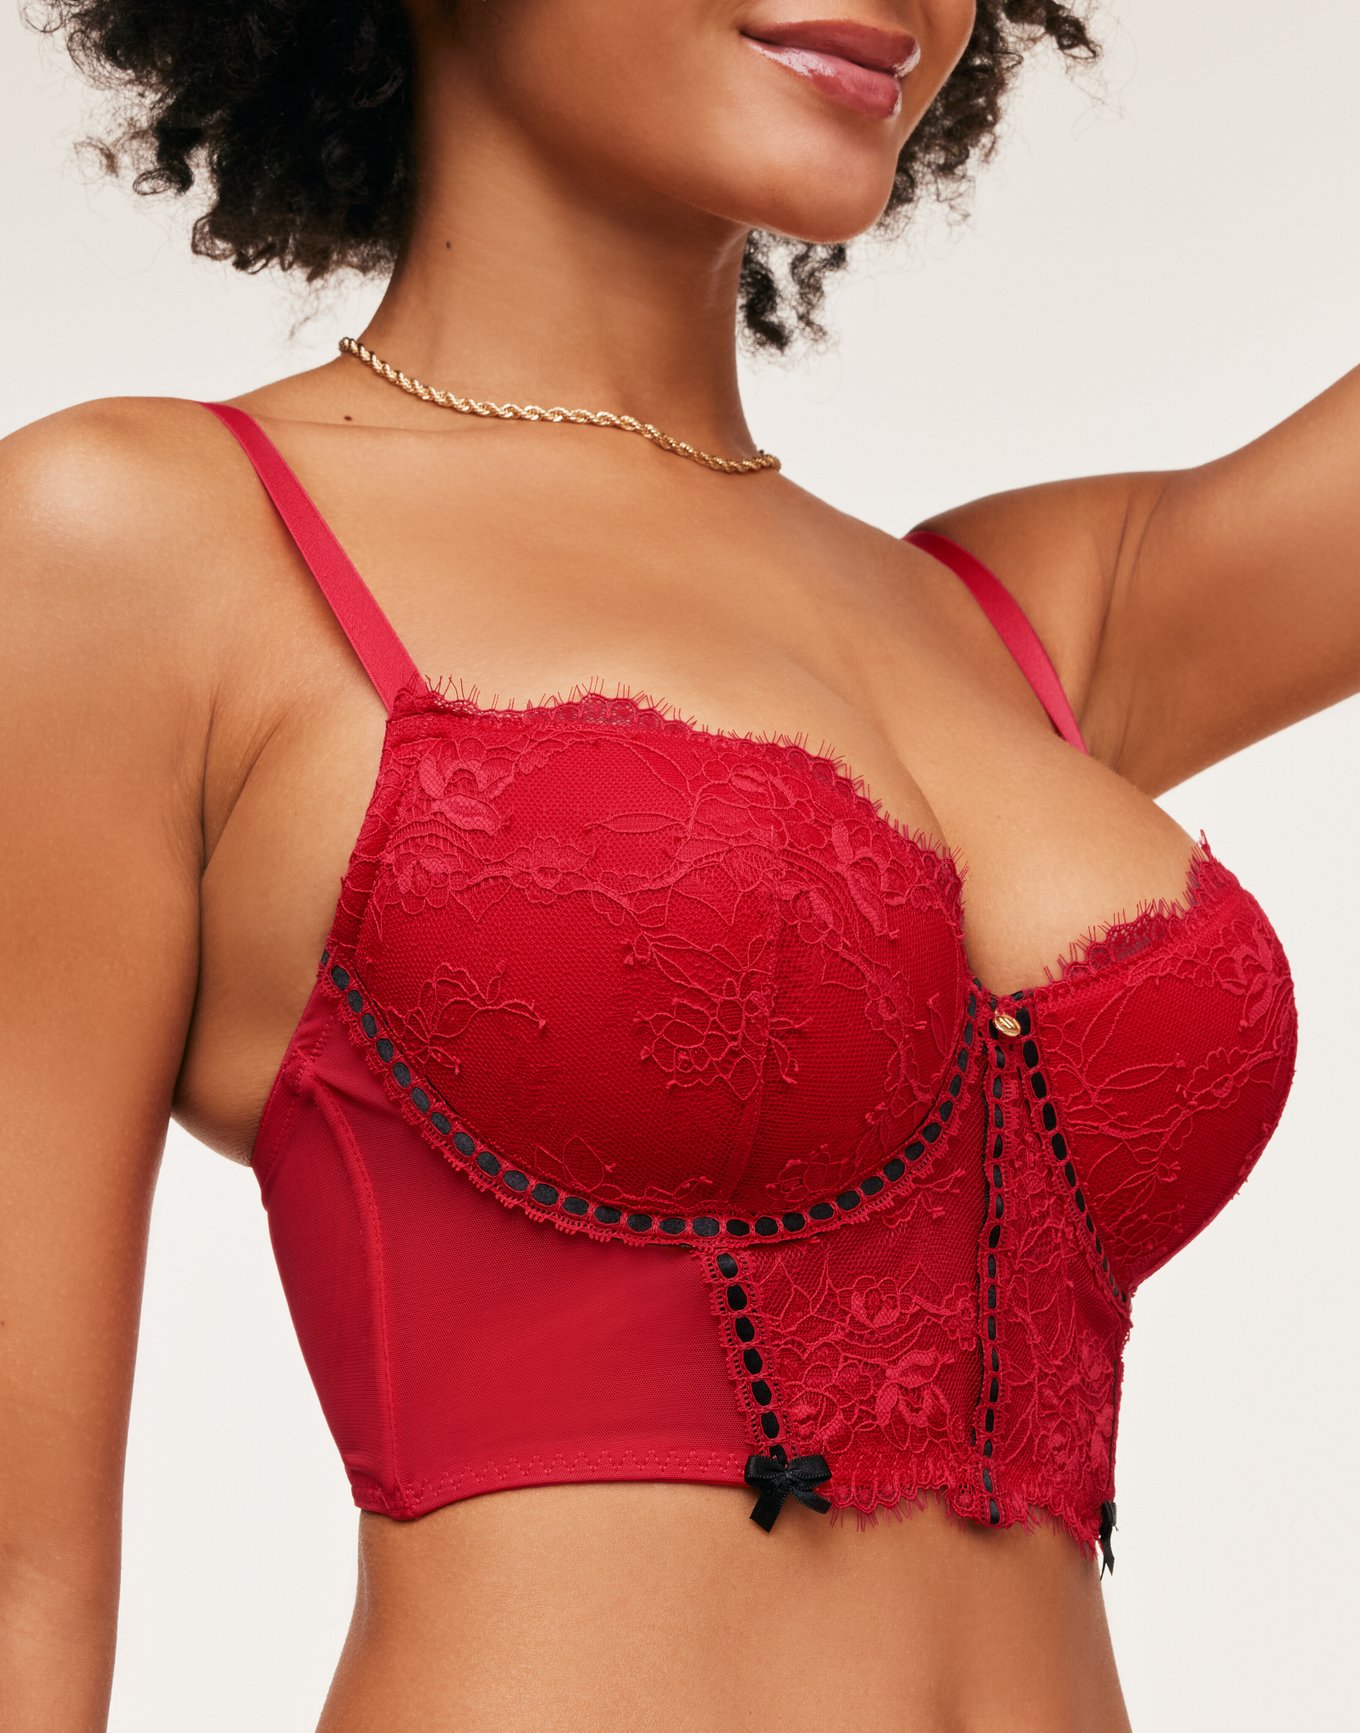 NEW Deep Red Soft Lace Bralette Size XL